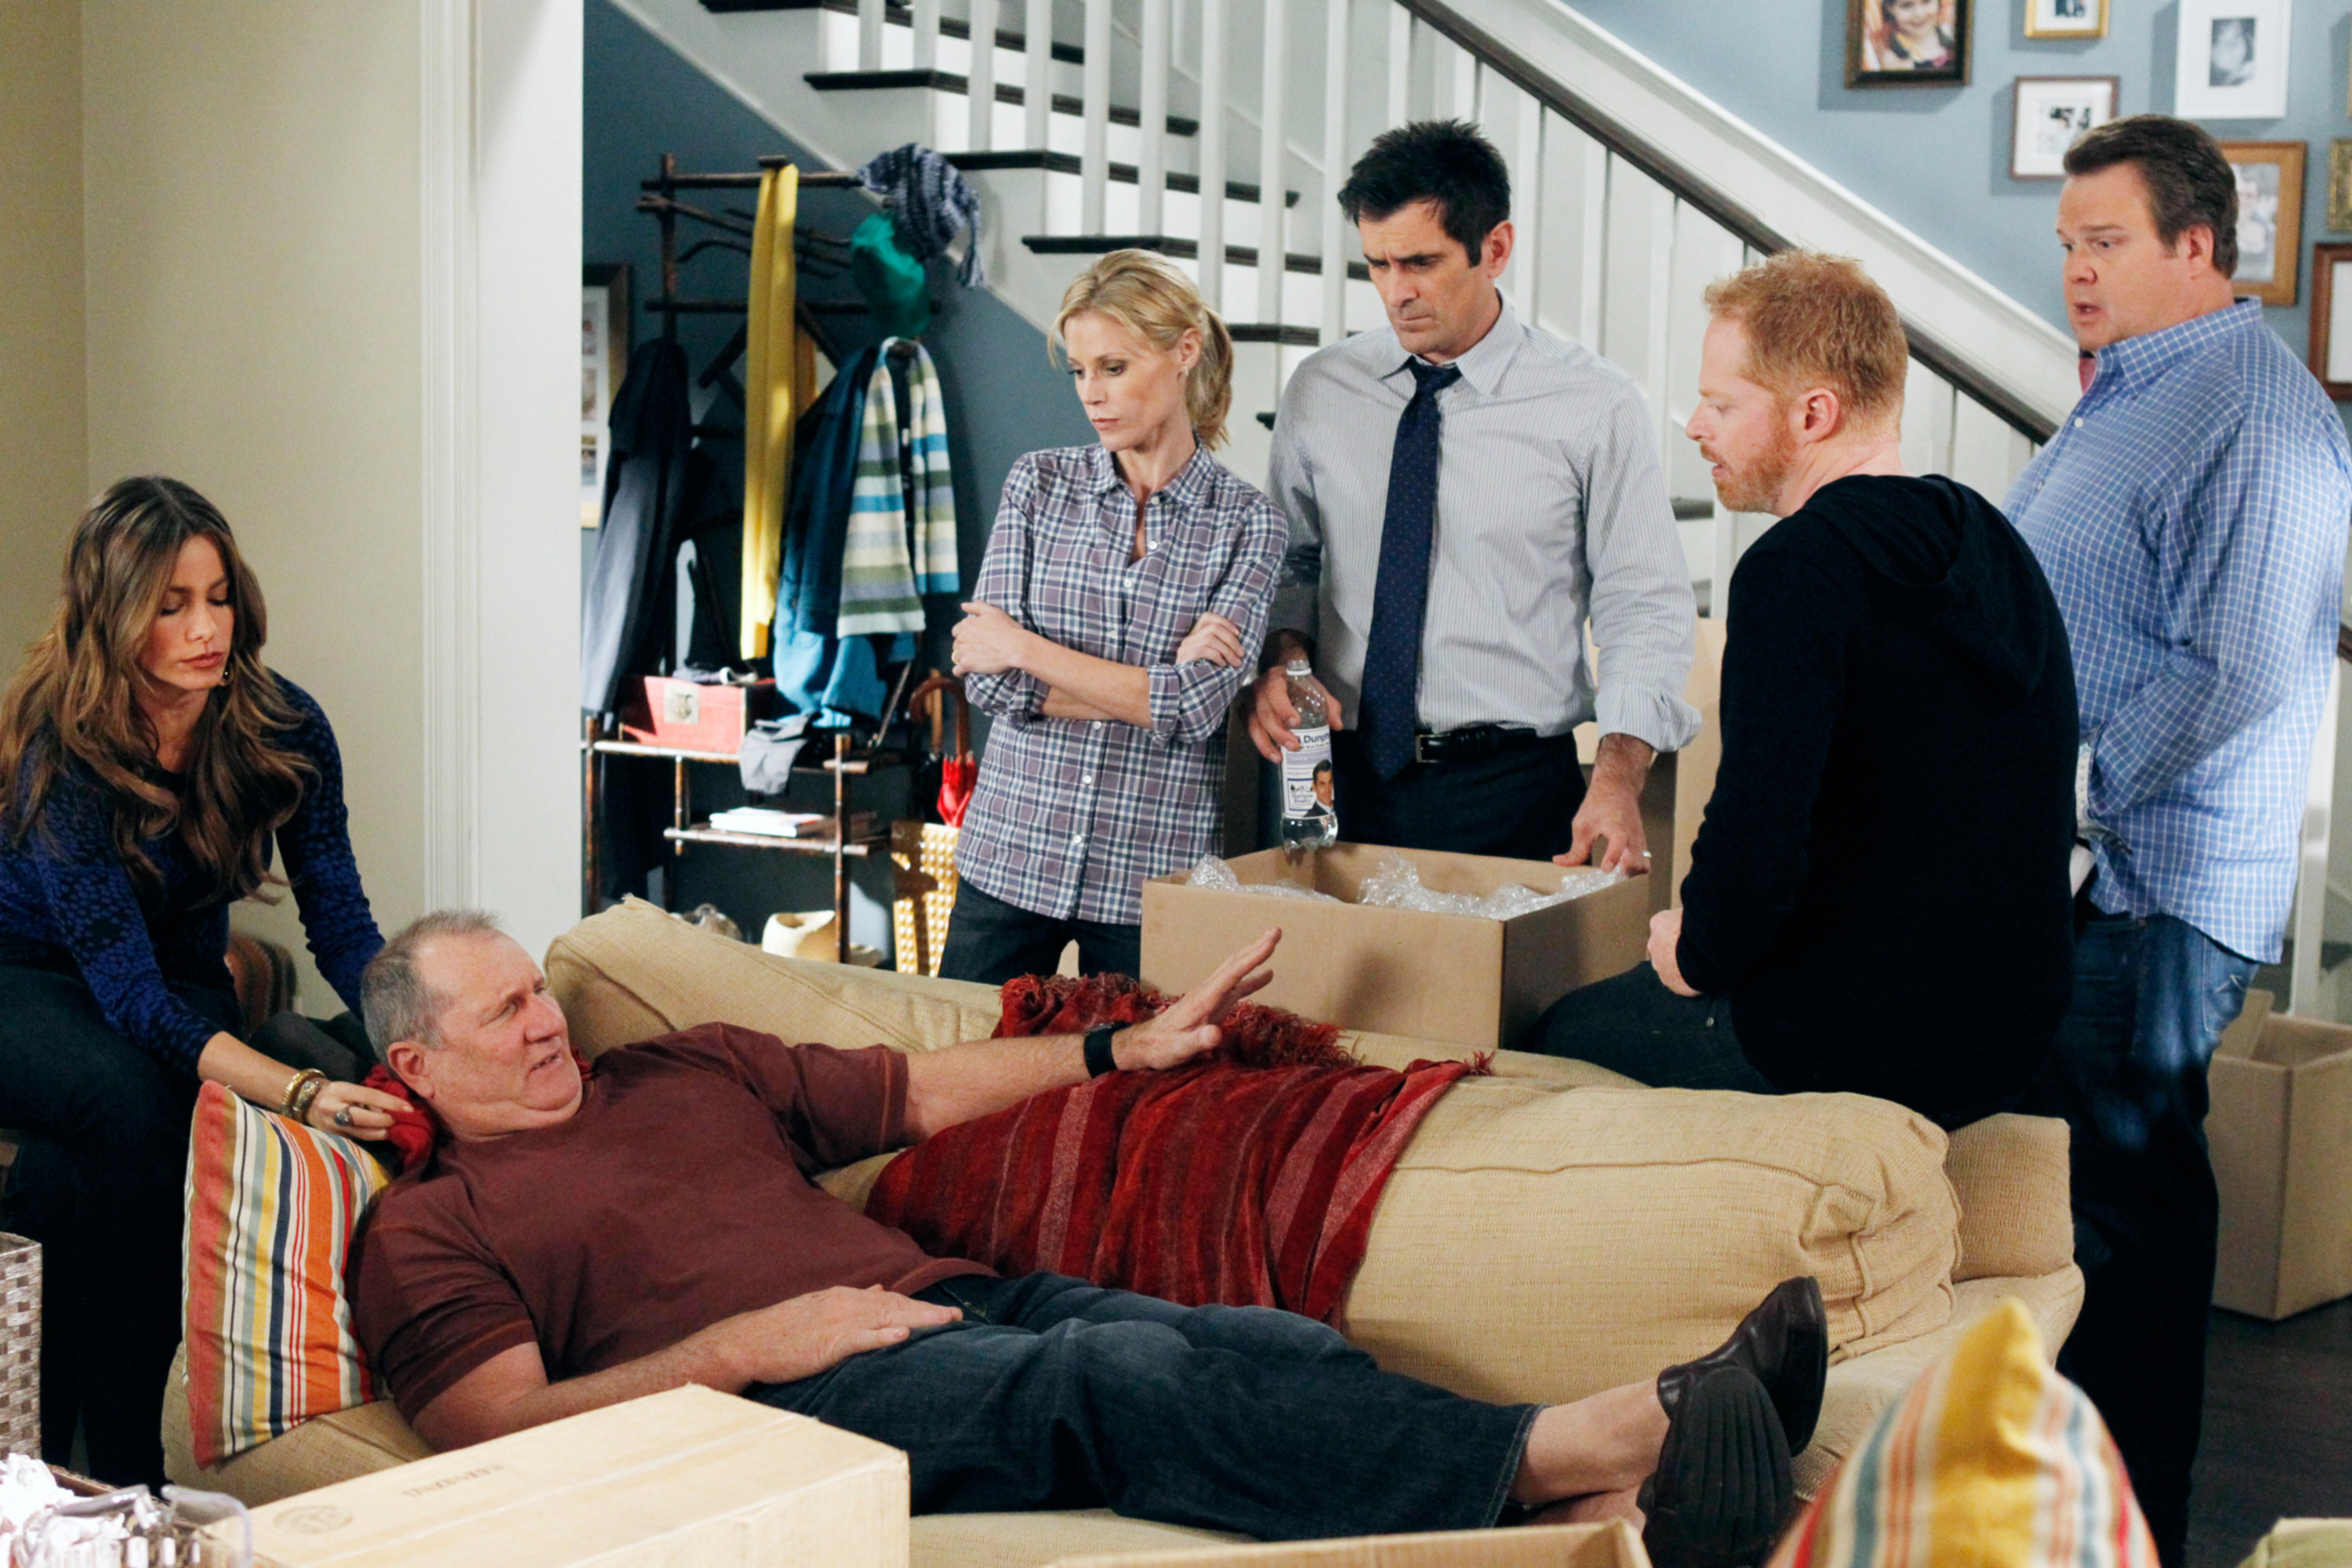 the characters surrounding the dad as he lies in pain on the couch